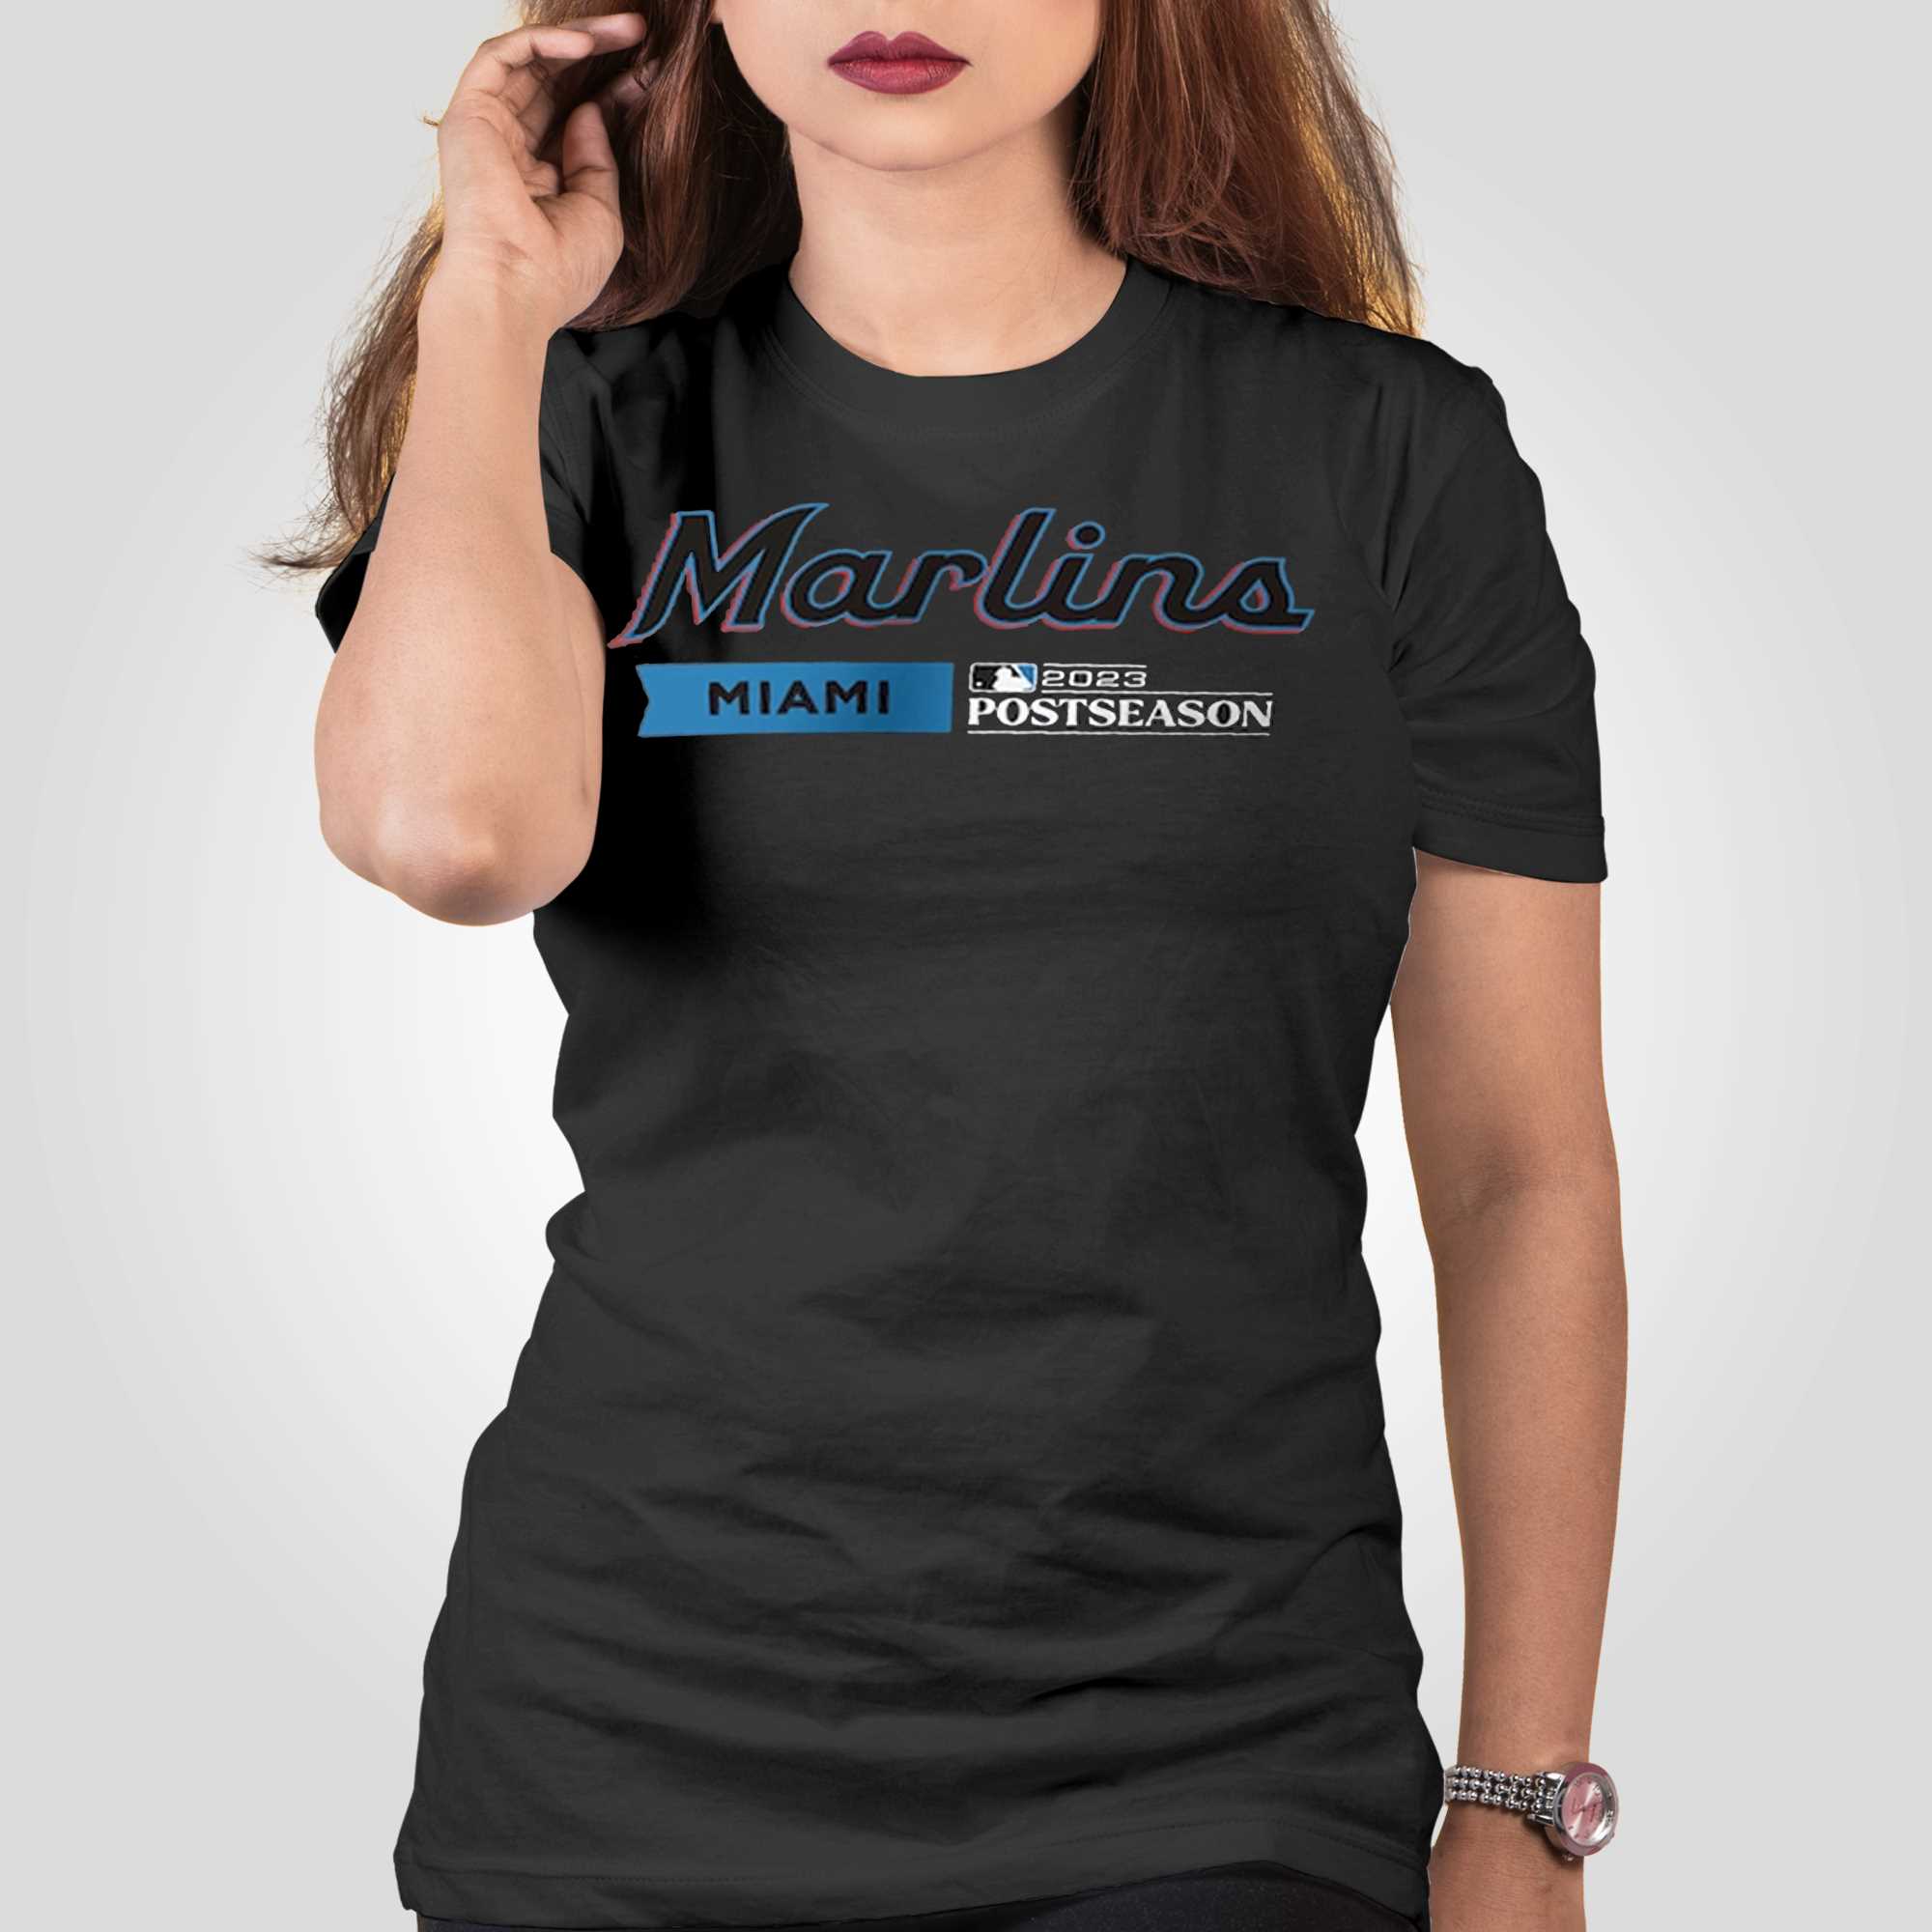 MLB World Tour Miami Marlins Baseball Logo 2023 Shirt - Bring Your Ideas,  Thoughts And Imaginations Into Reality Today